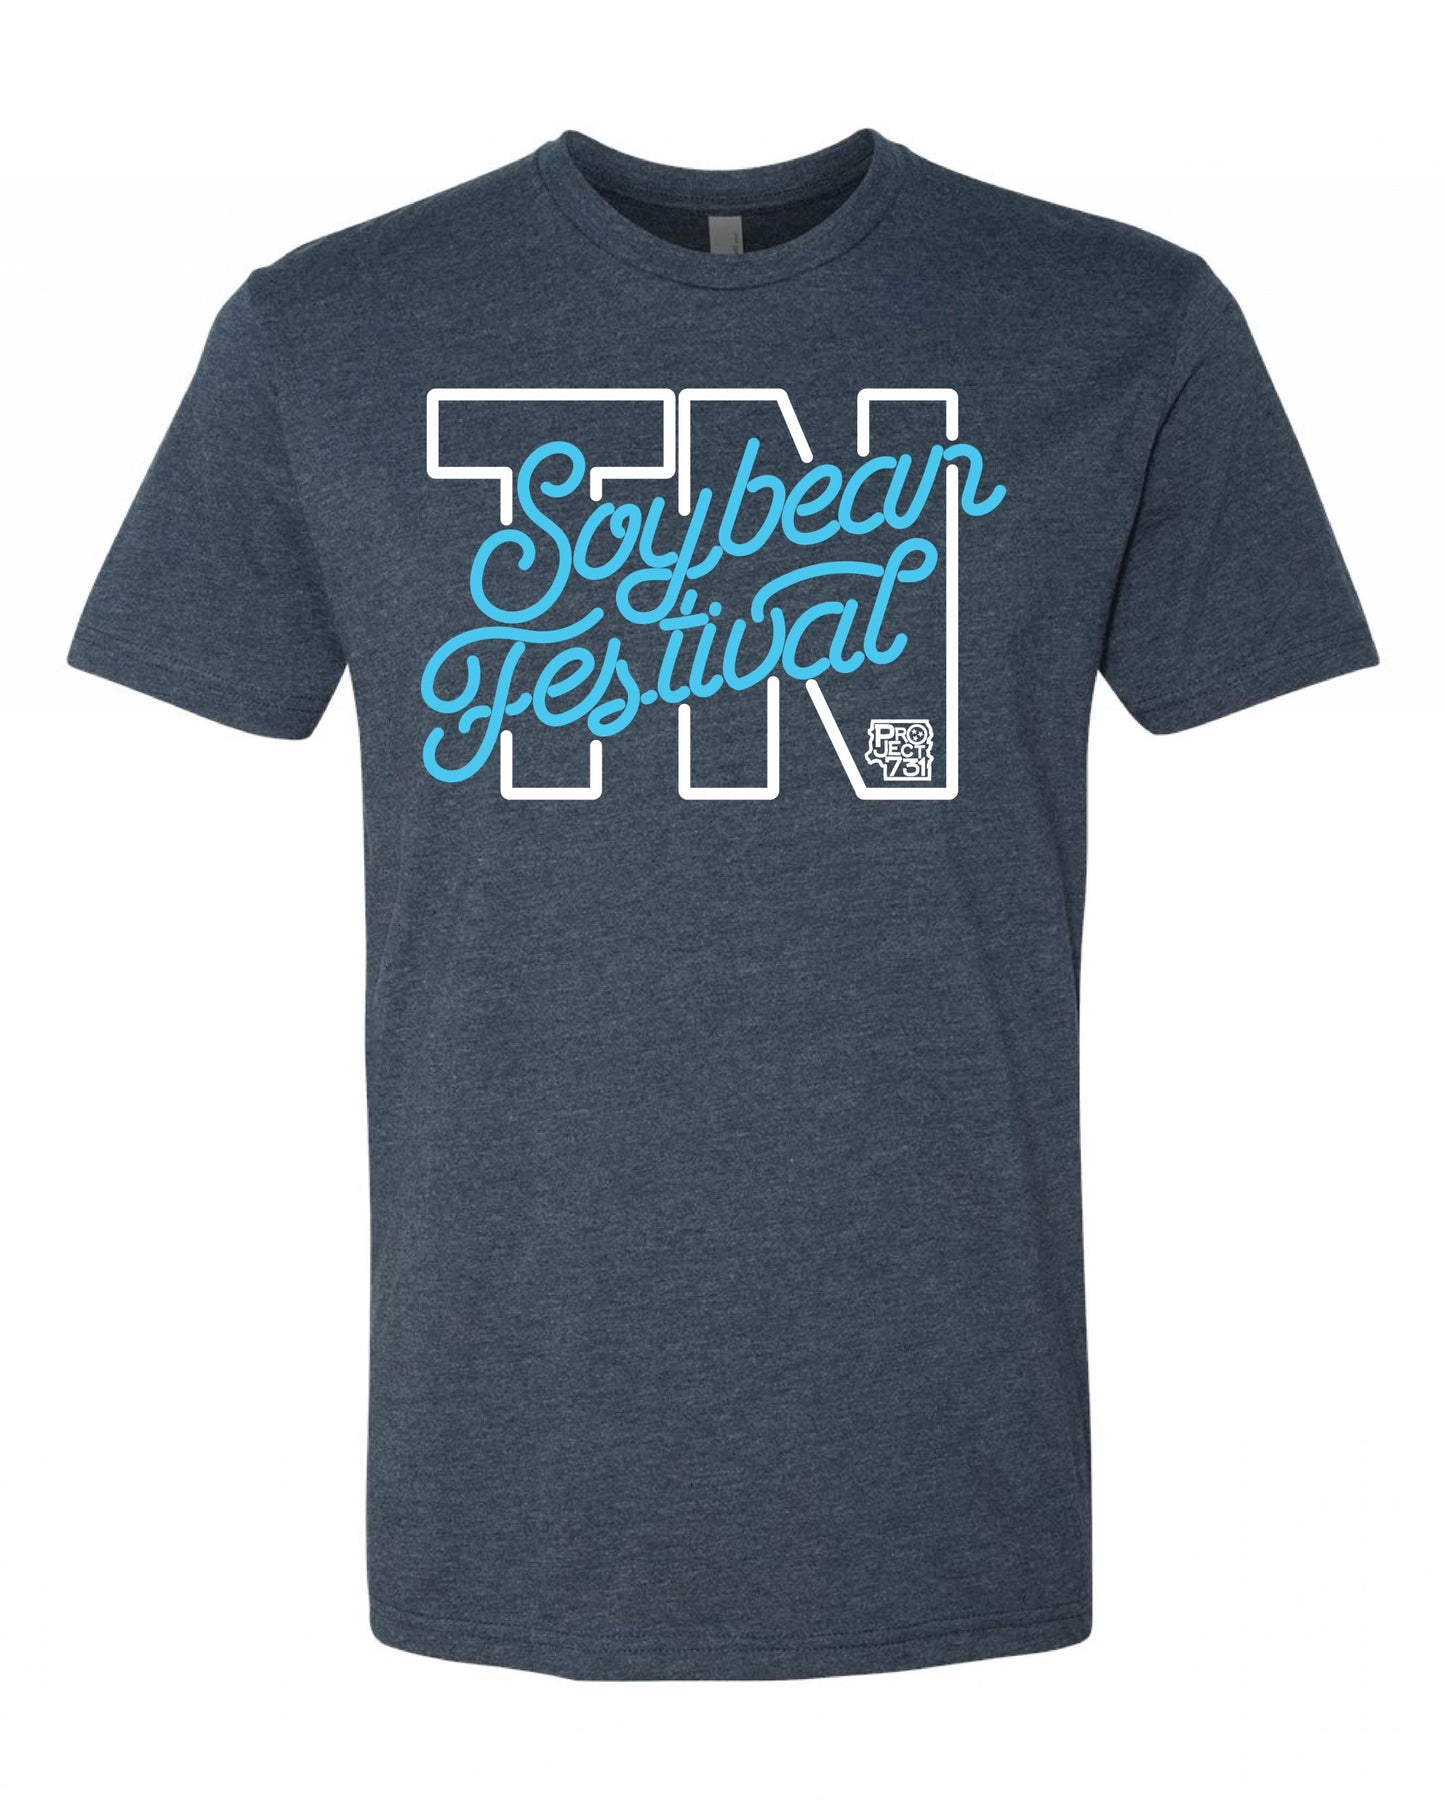 TENNESSEE SOYBEAN NEON SIGN galaxy tee